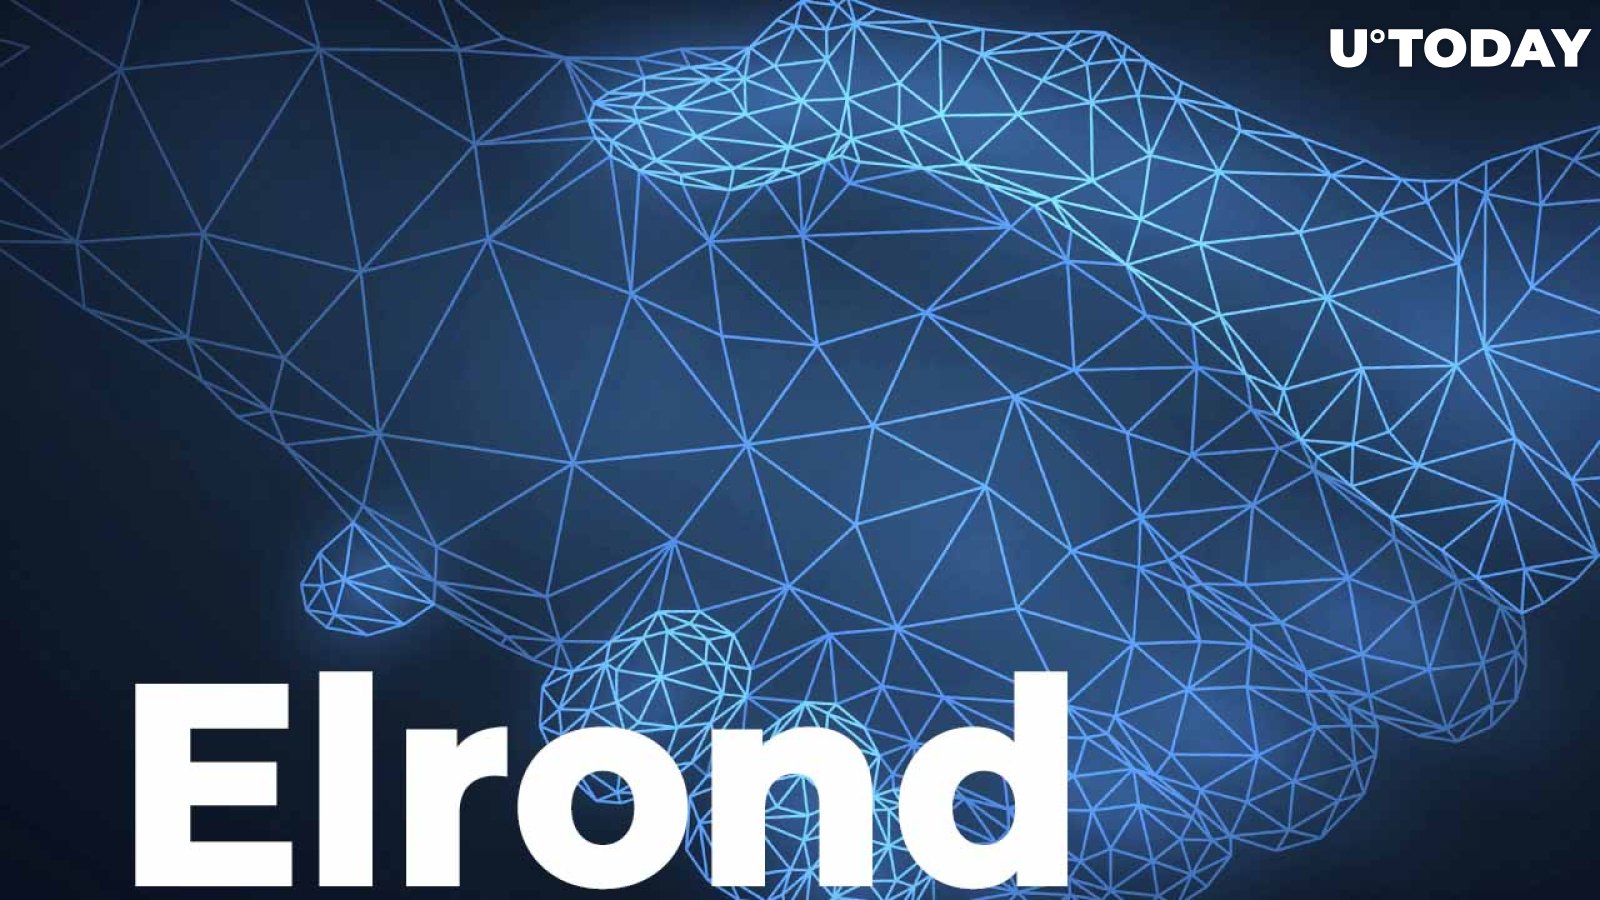 Elrond Announces Partnership to Access Markets in Over 200 Countries: Details